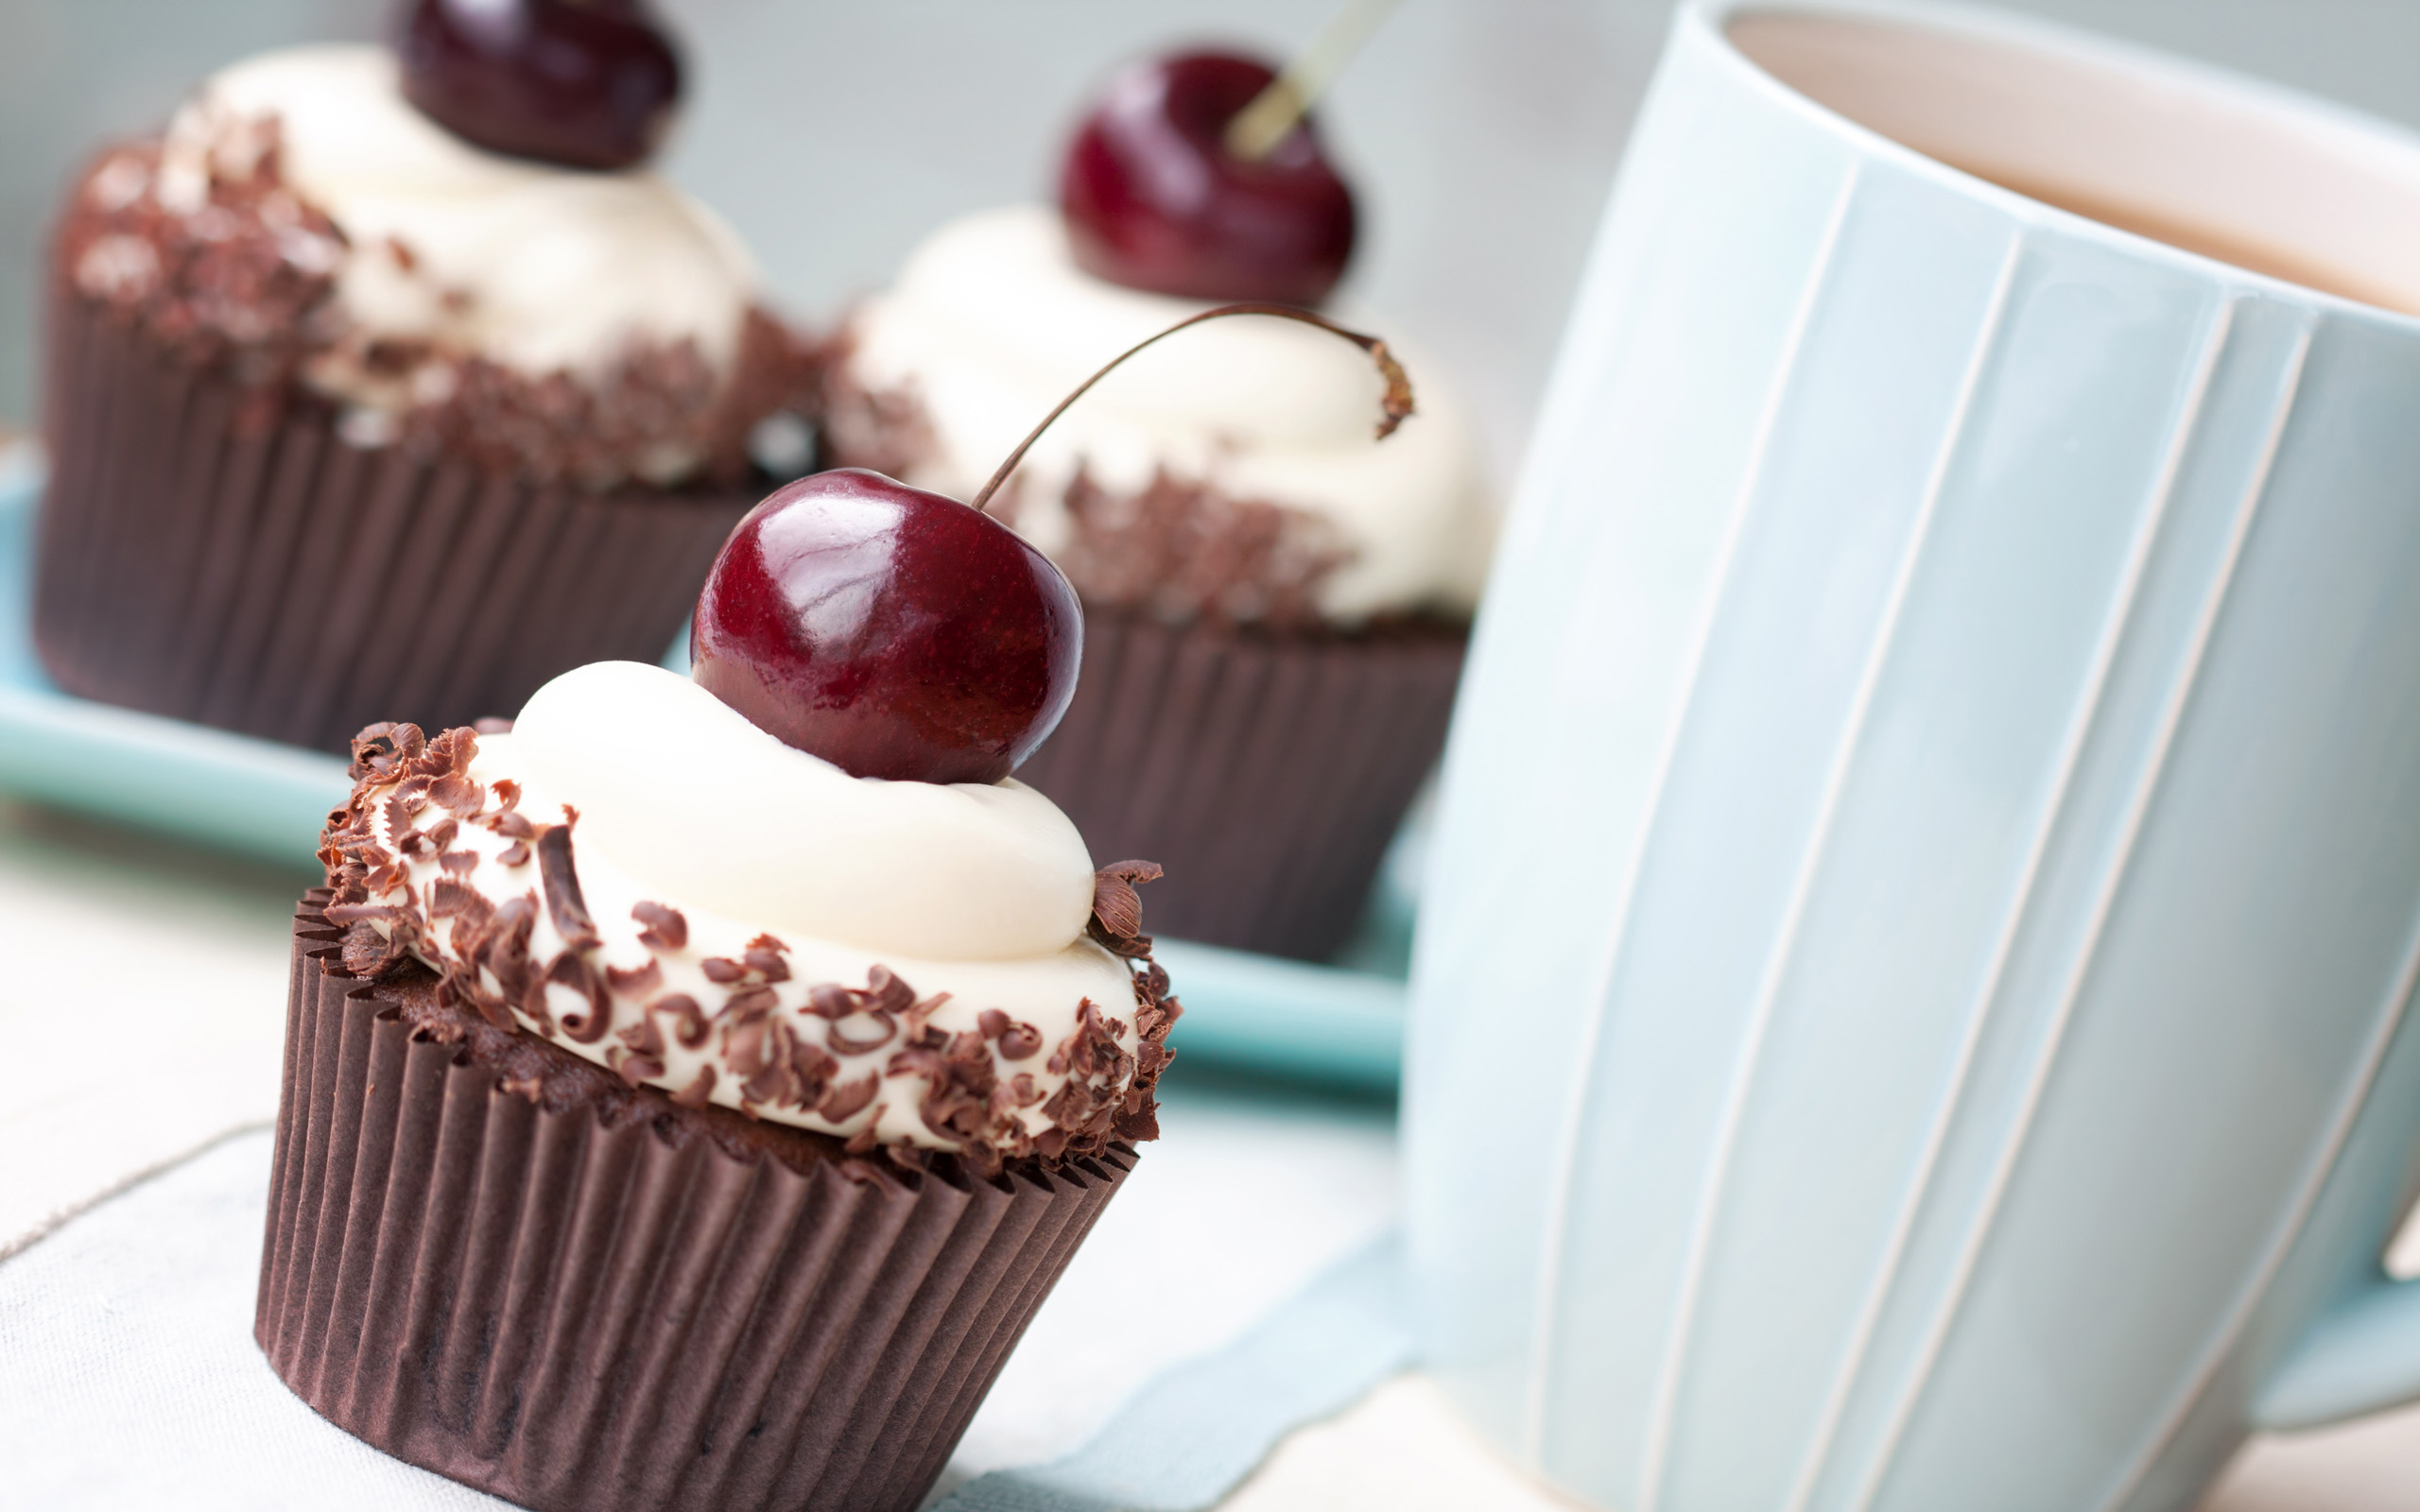 Cup Cakes Images Hd - HD Wallpaper 